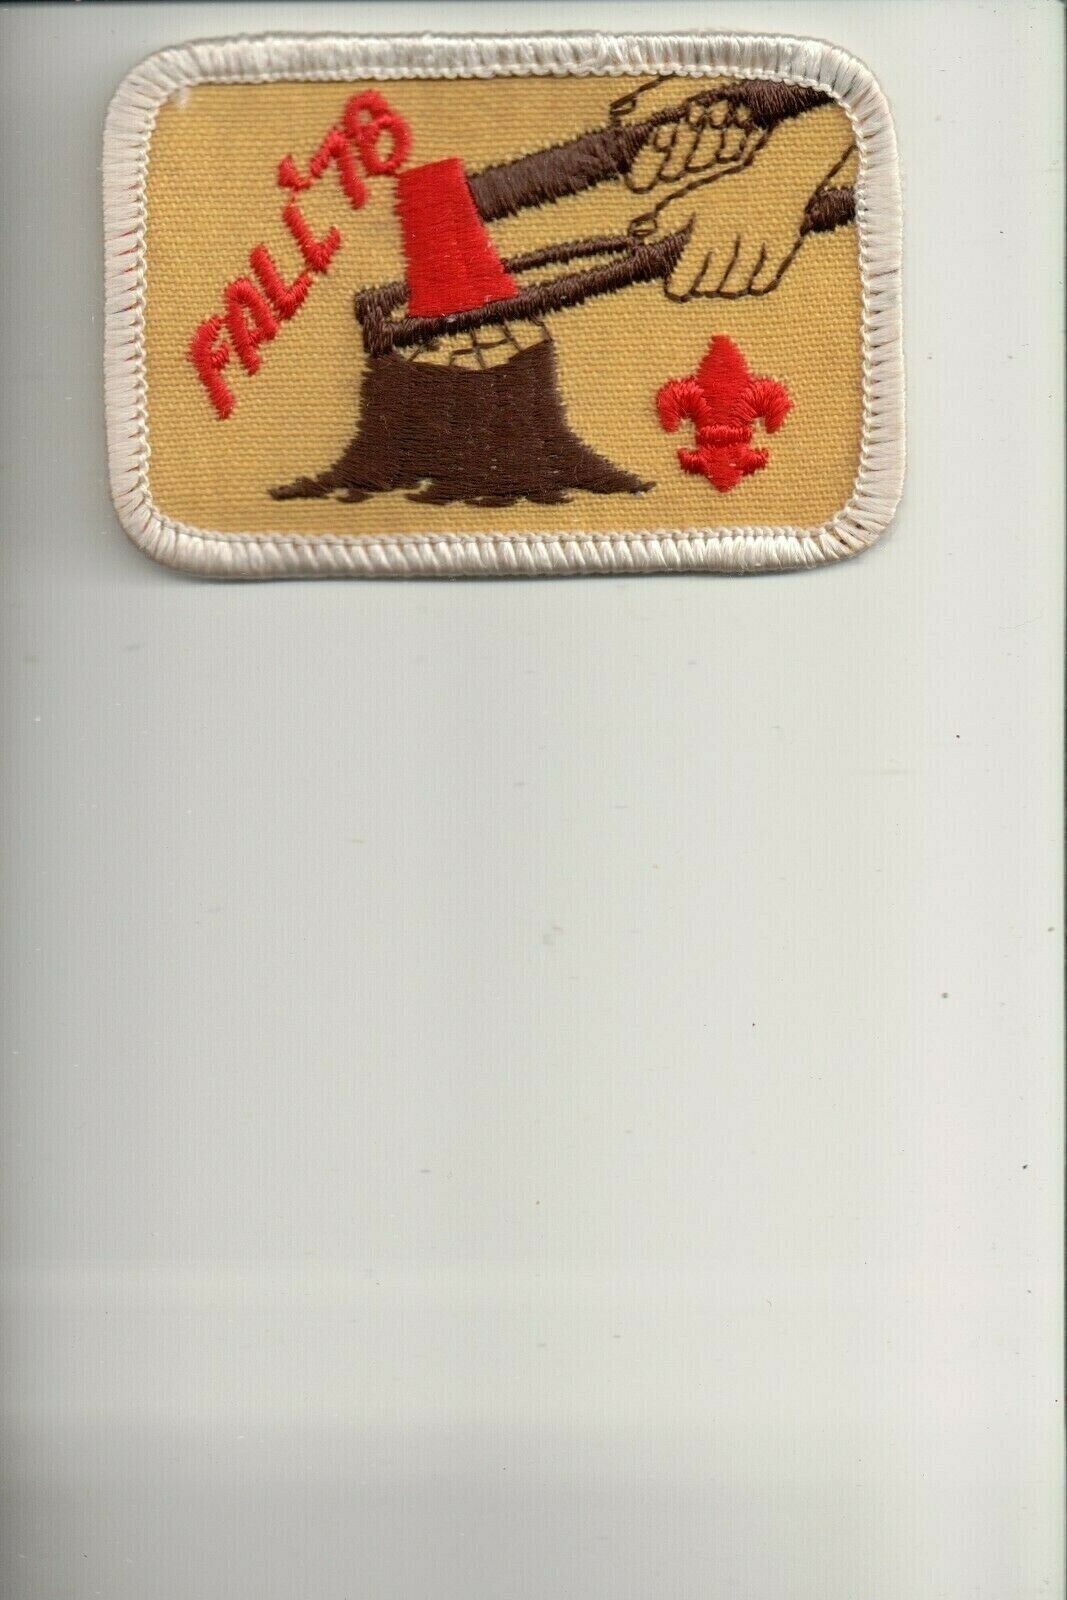 1978 Fall patch